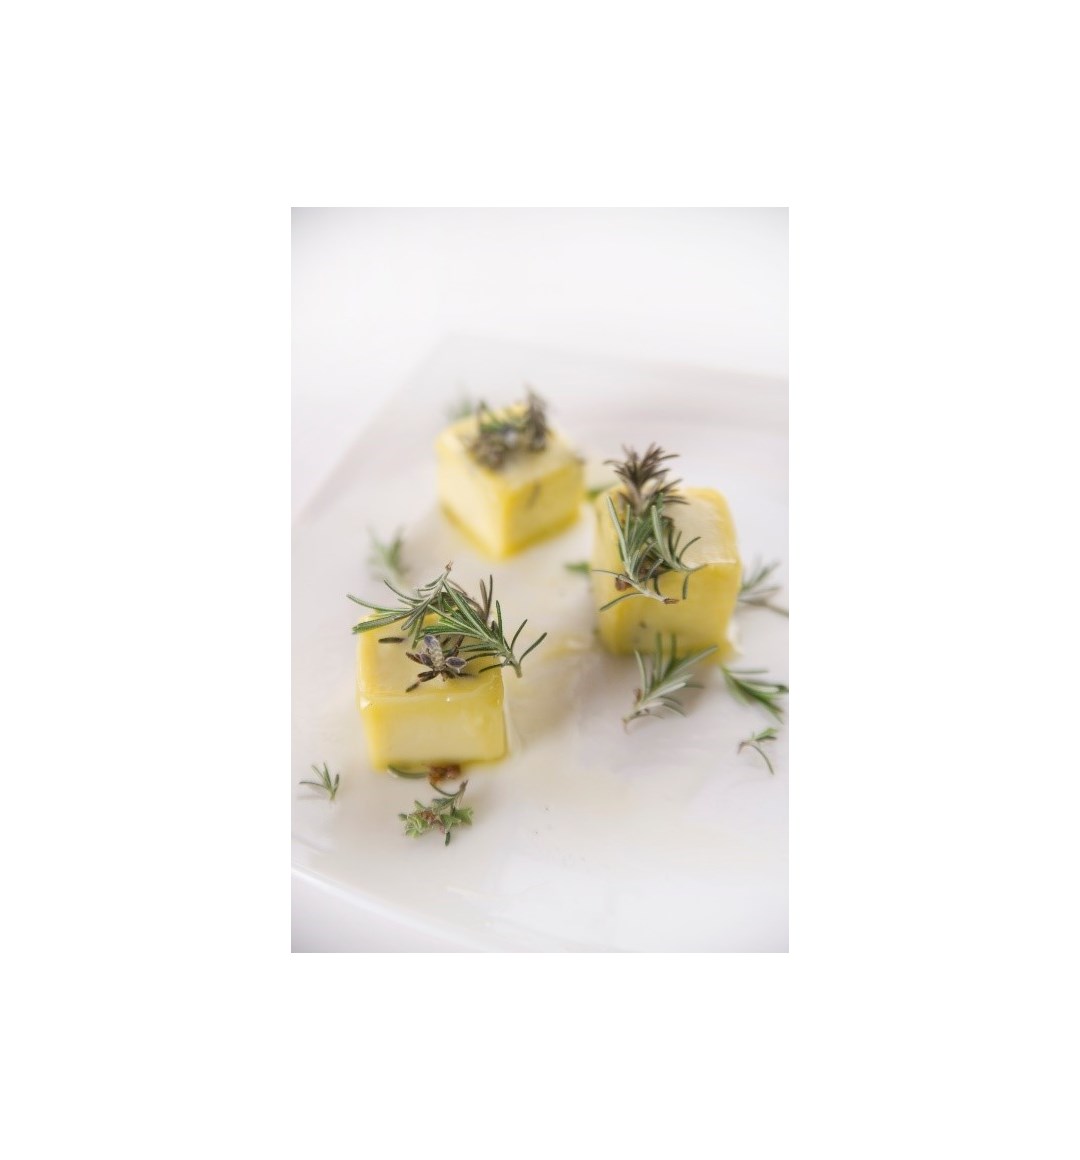 Herbed_Olive_Oil_Ice_Cubes